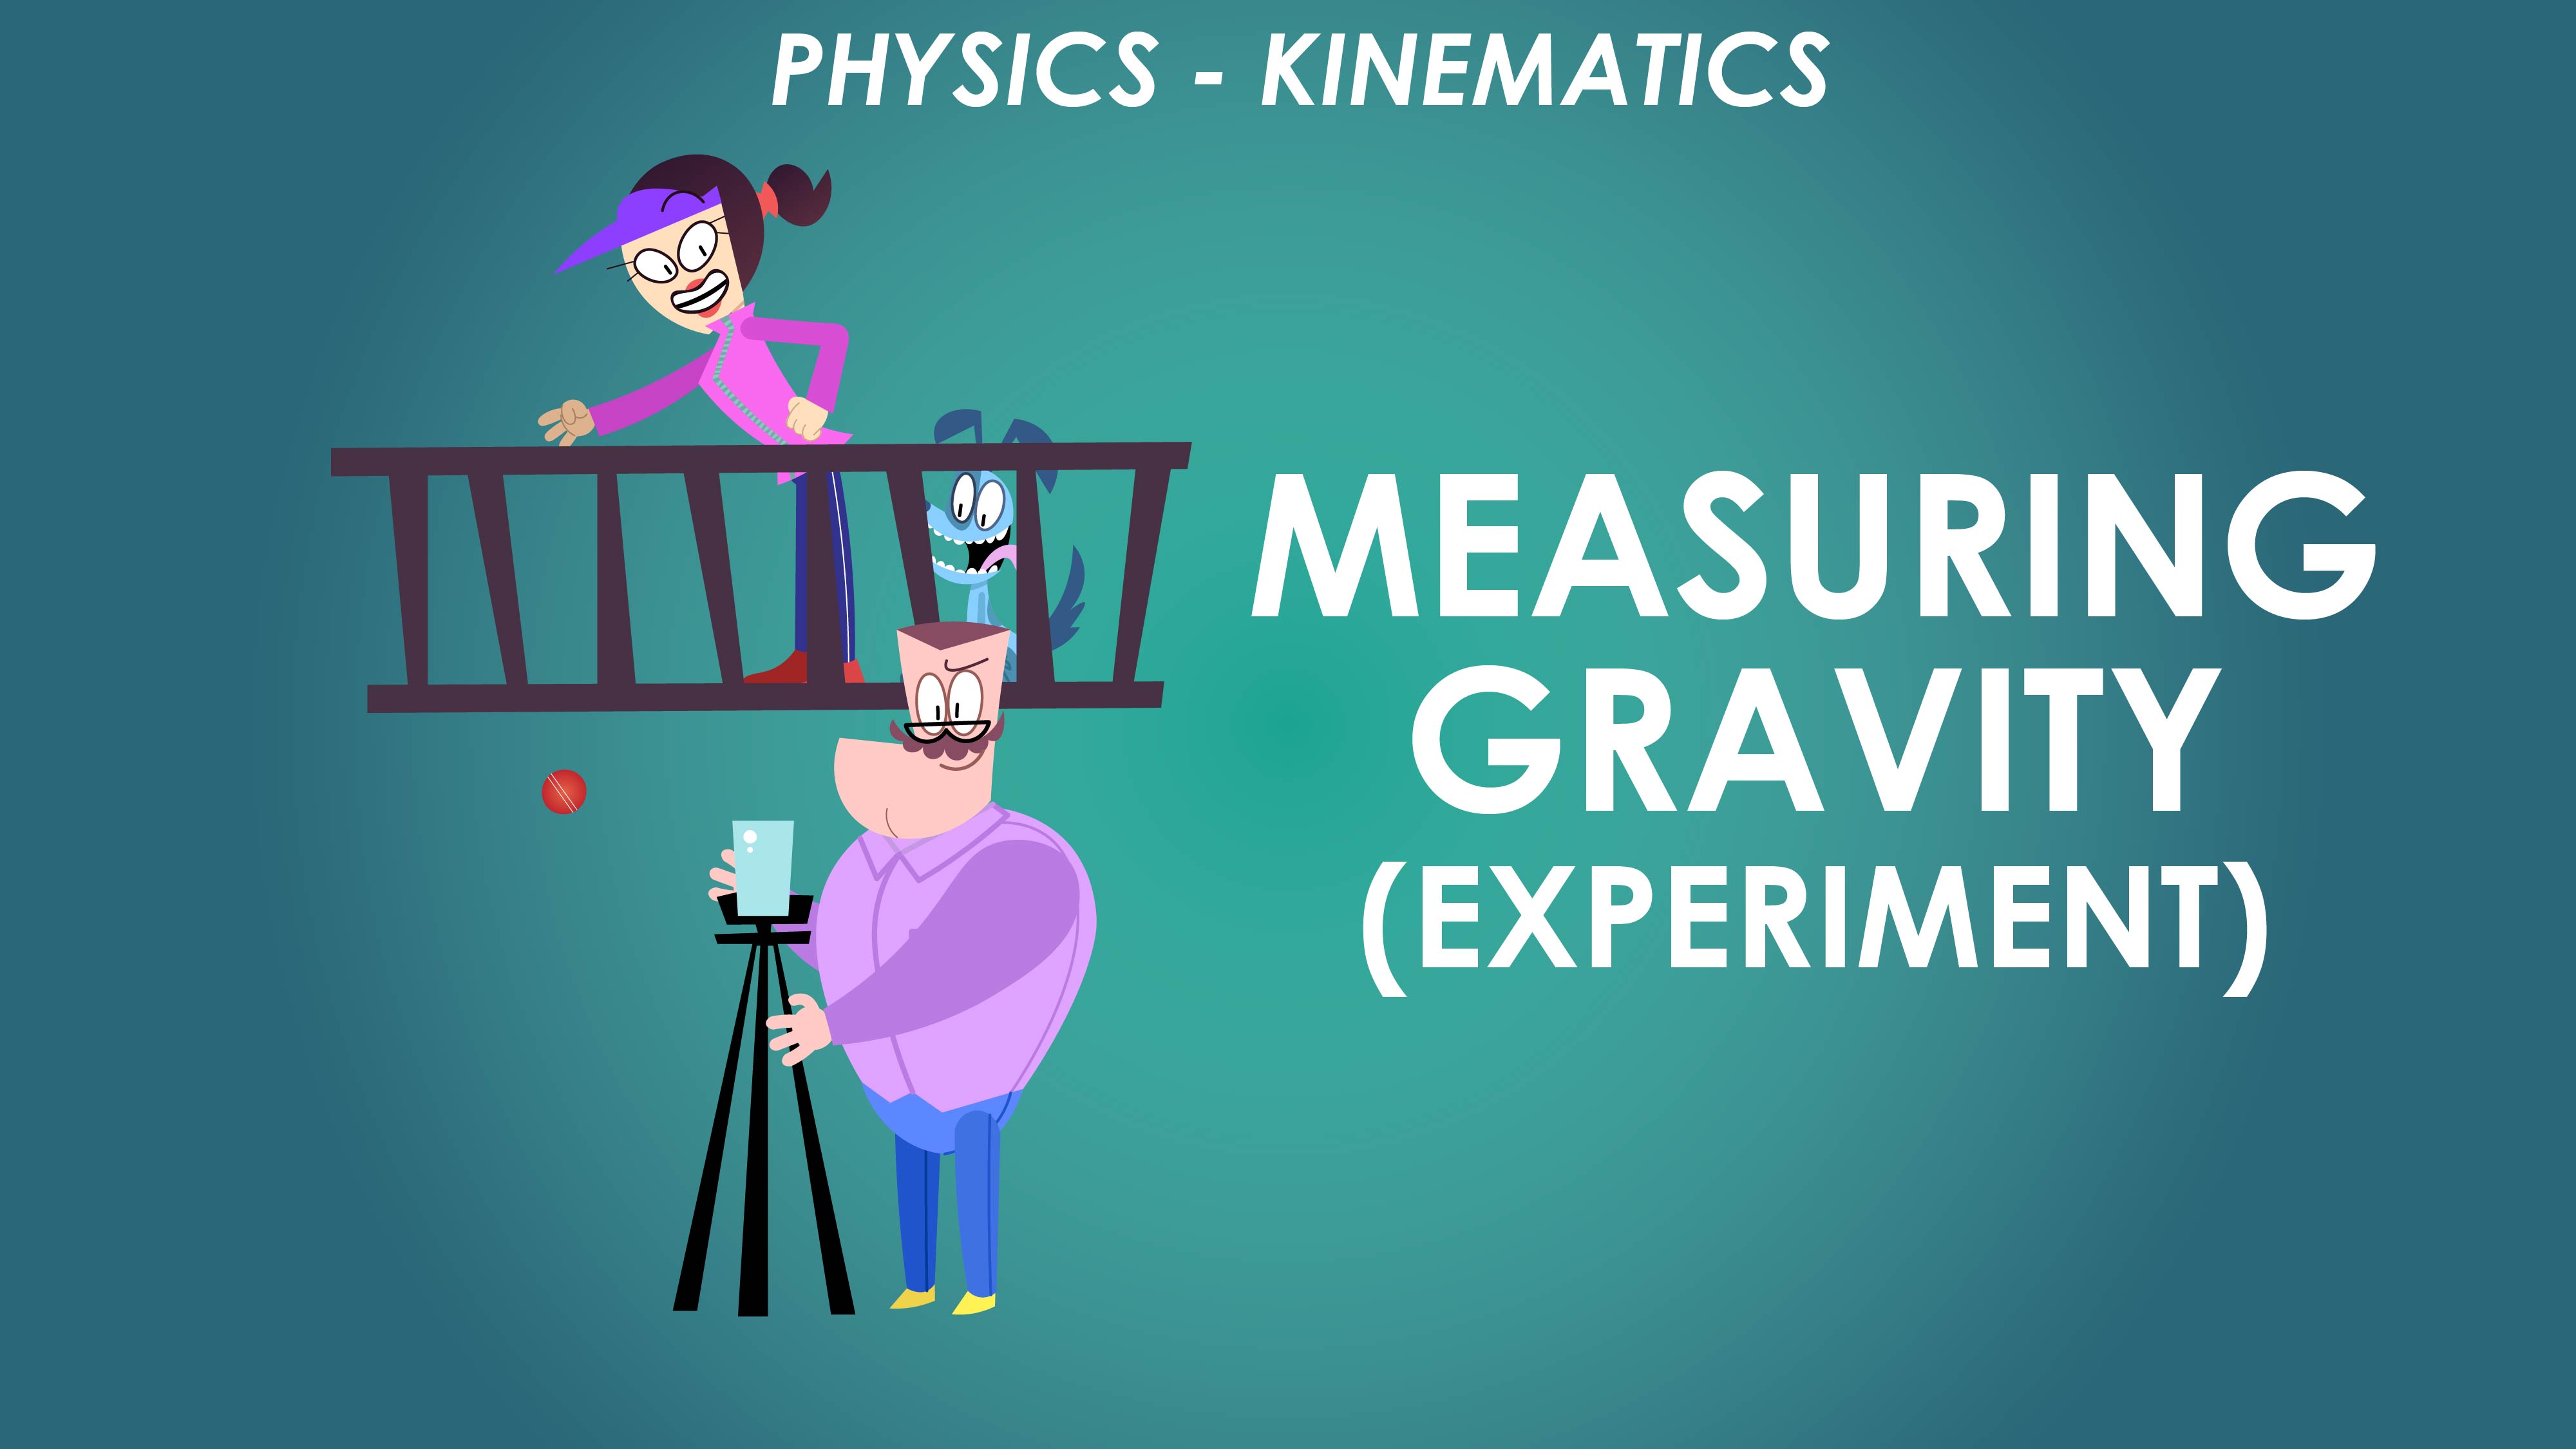 Measuring Gravity 1 - Motion in a Straight Line